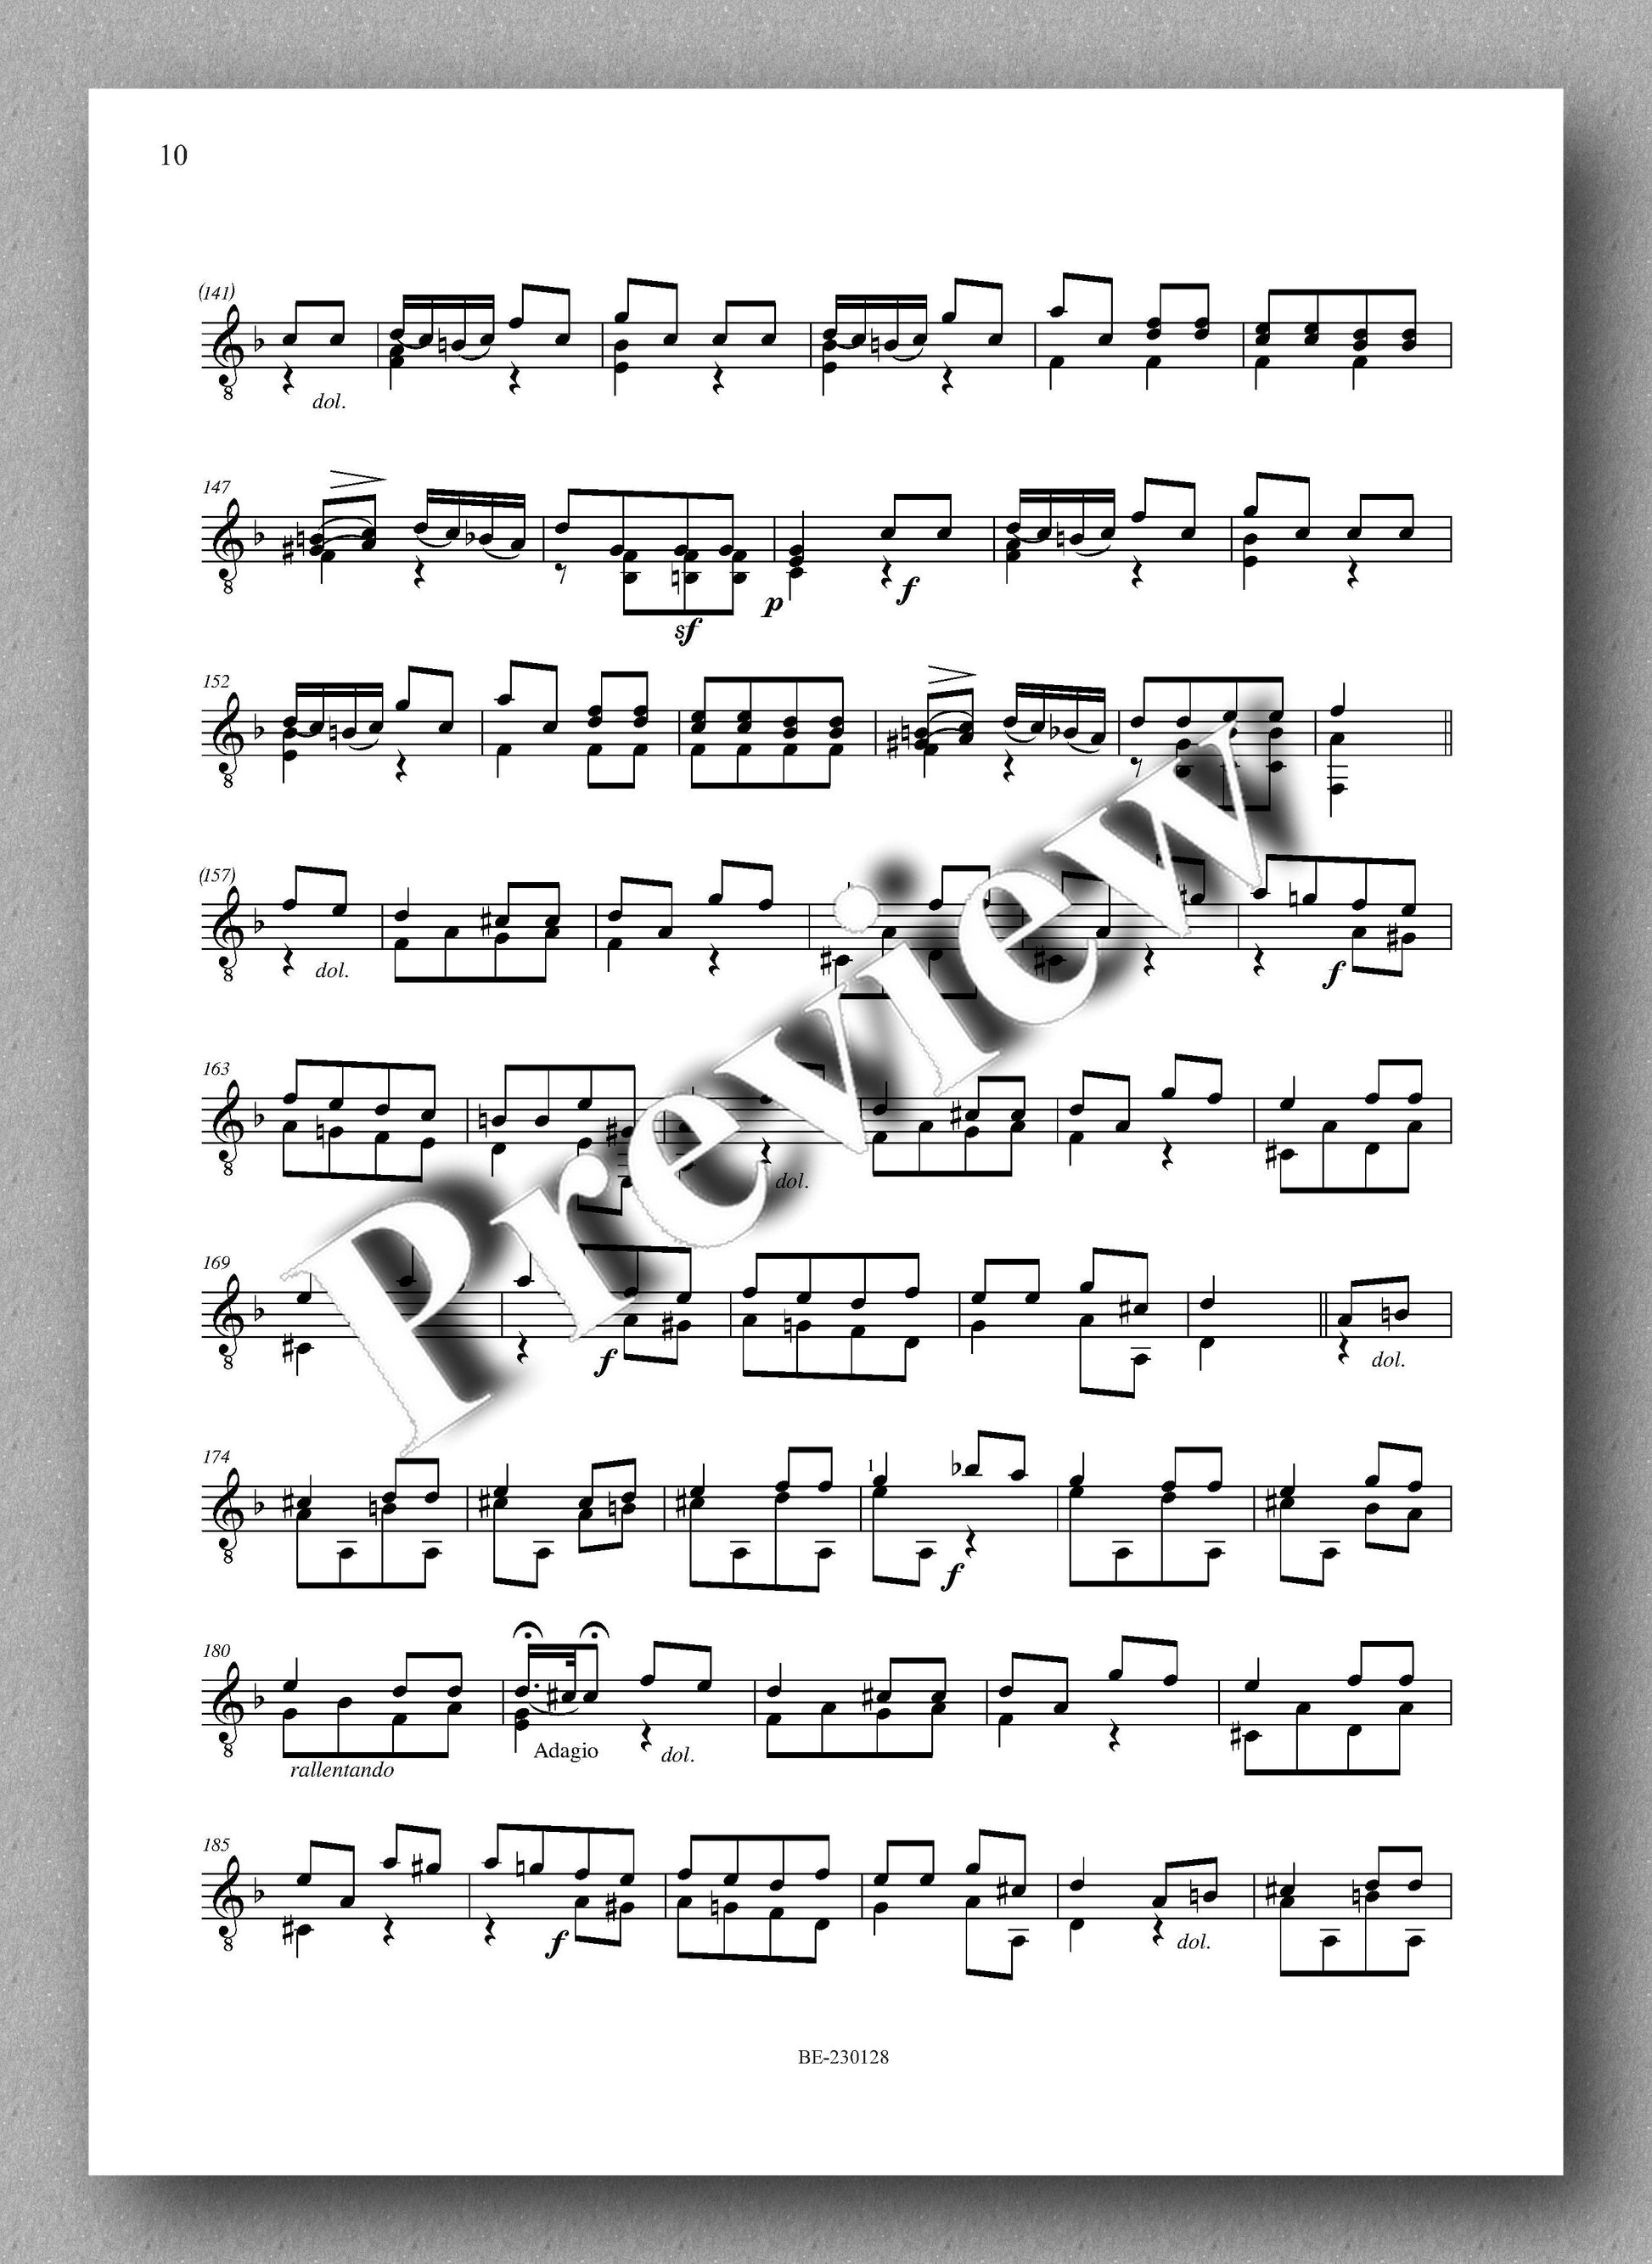 Molino, Collected Works for Guitar Solo, Vol. 40 - preview of the music score 2